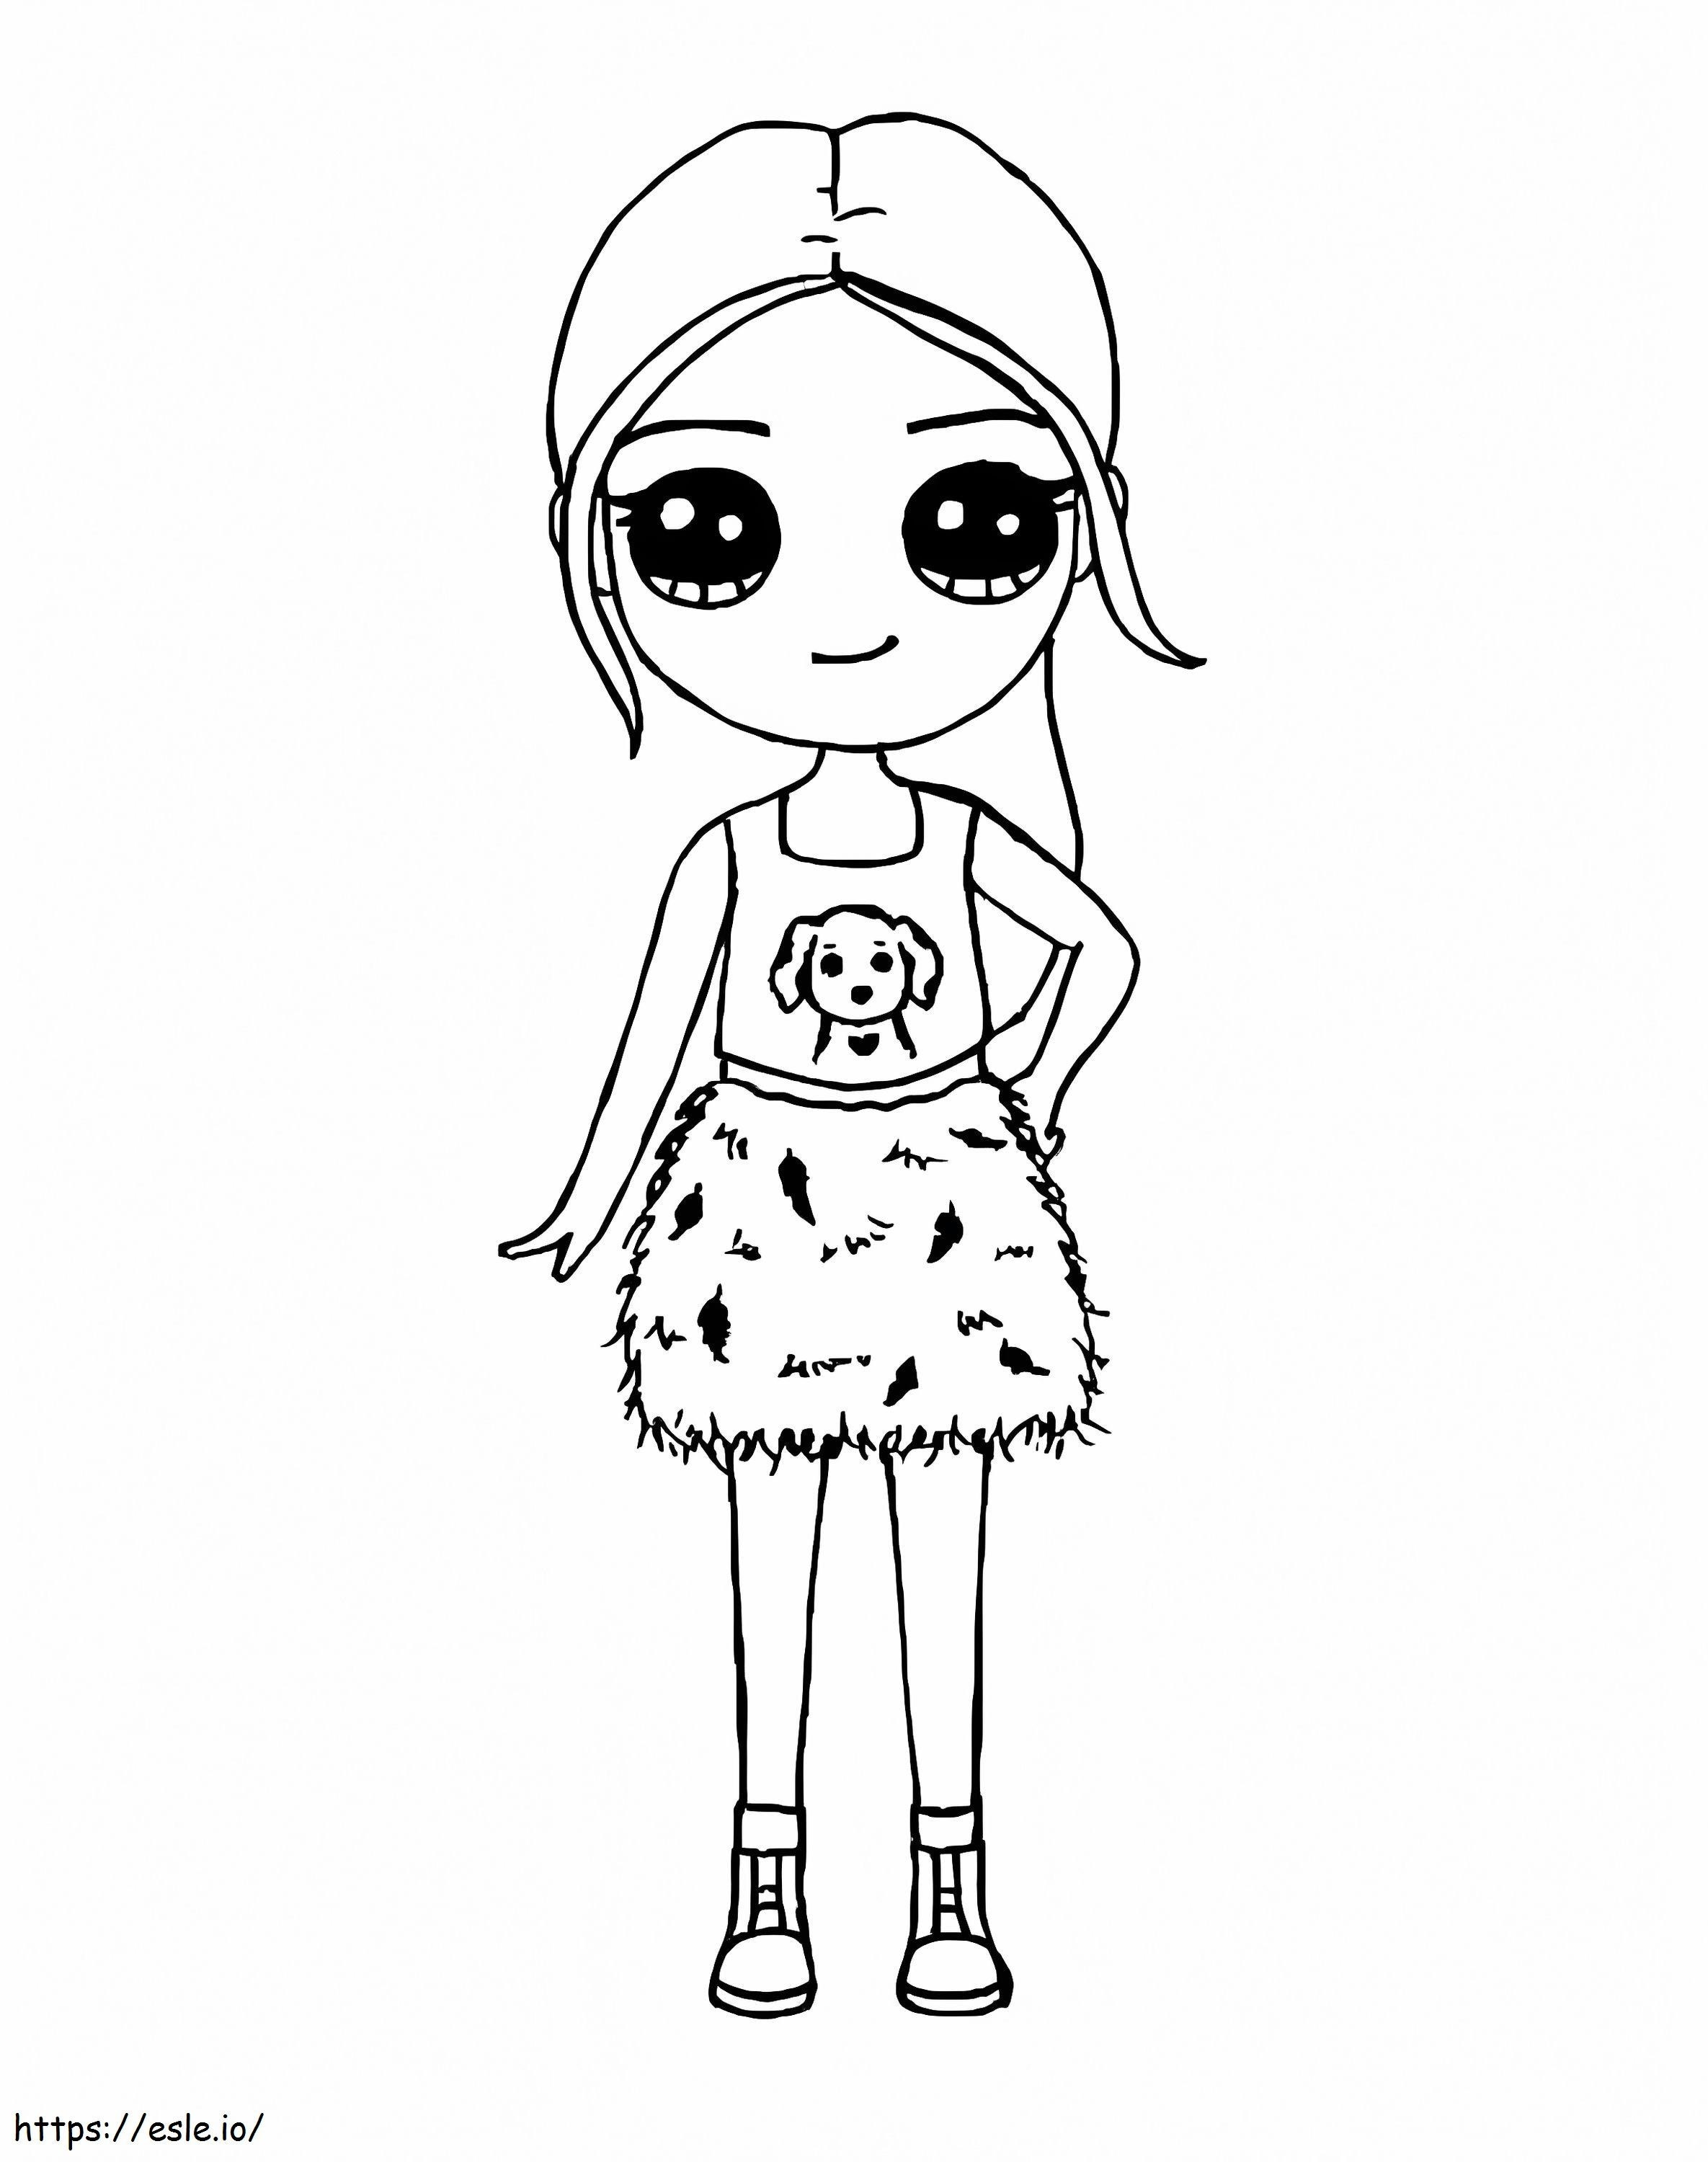 Cute Rose Blackpink coloring page